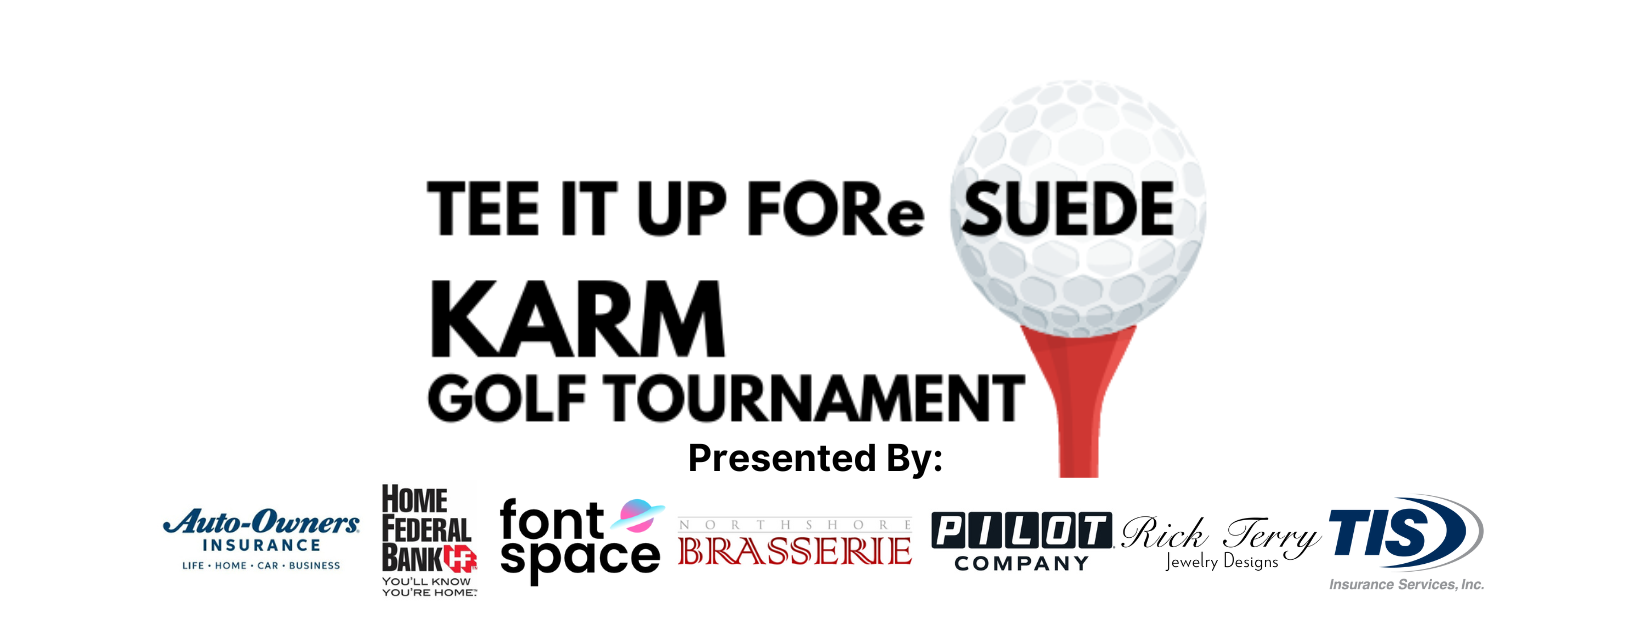 TEE IT UP FORe SUEDE KARM GOLF TOURNAMENT